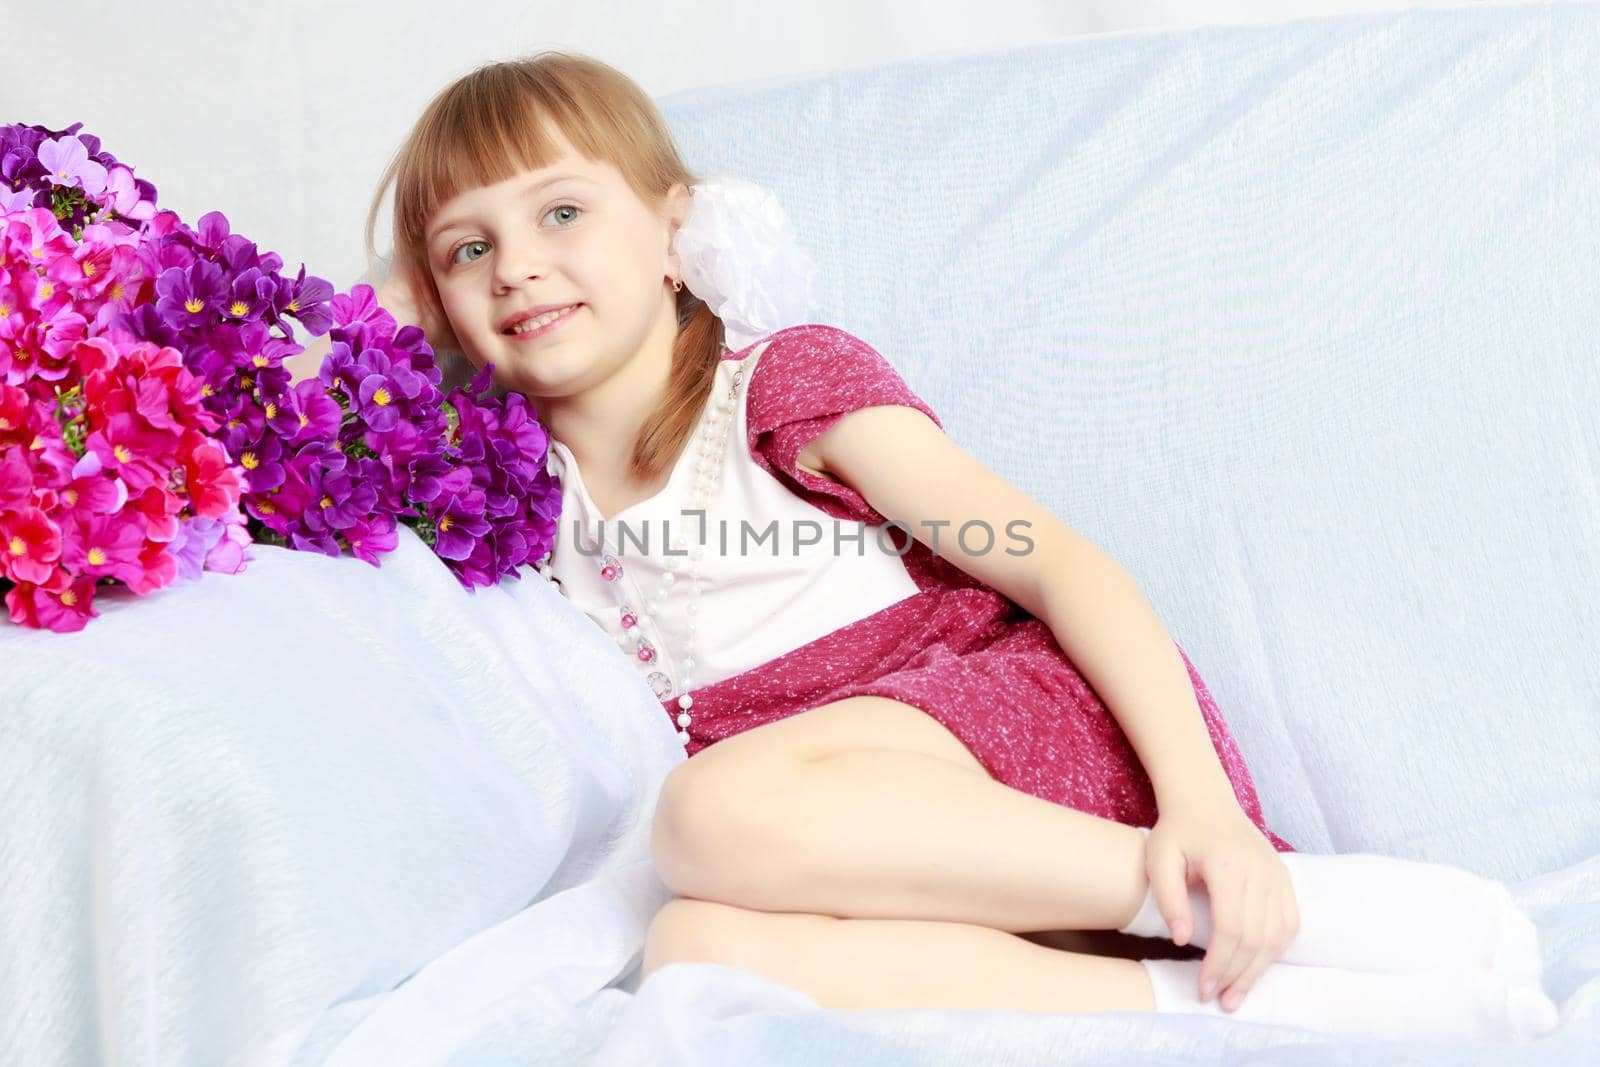 Beautiful little blonde girl with short bangs and pigtails on her head in a good mood.She sits next to a bouquet of flowers.